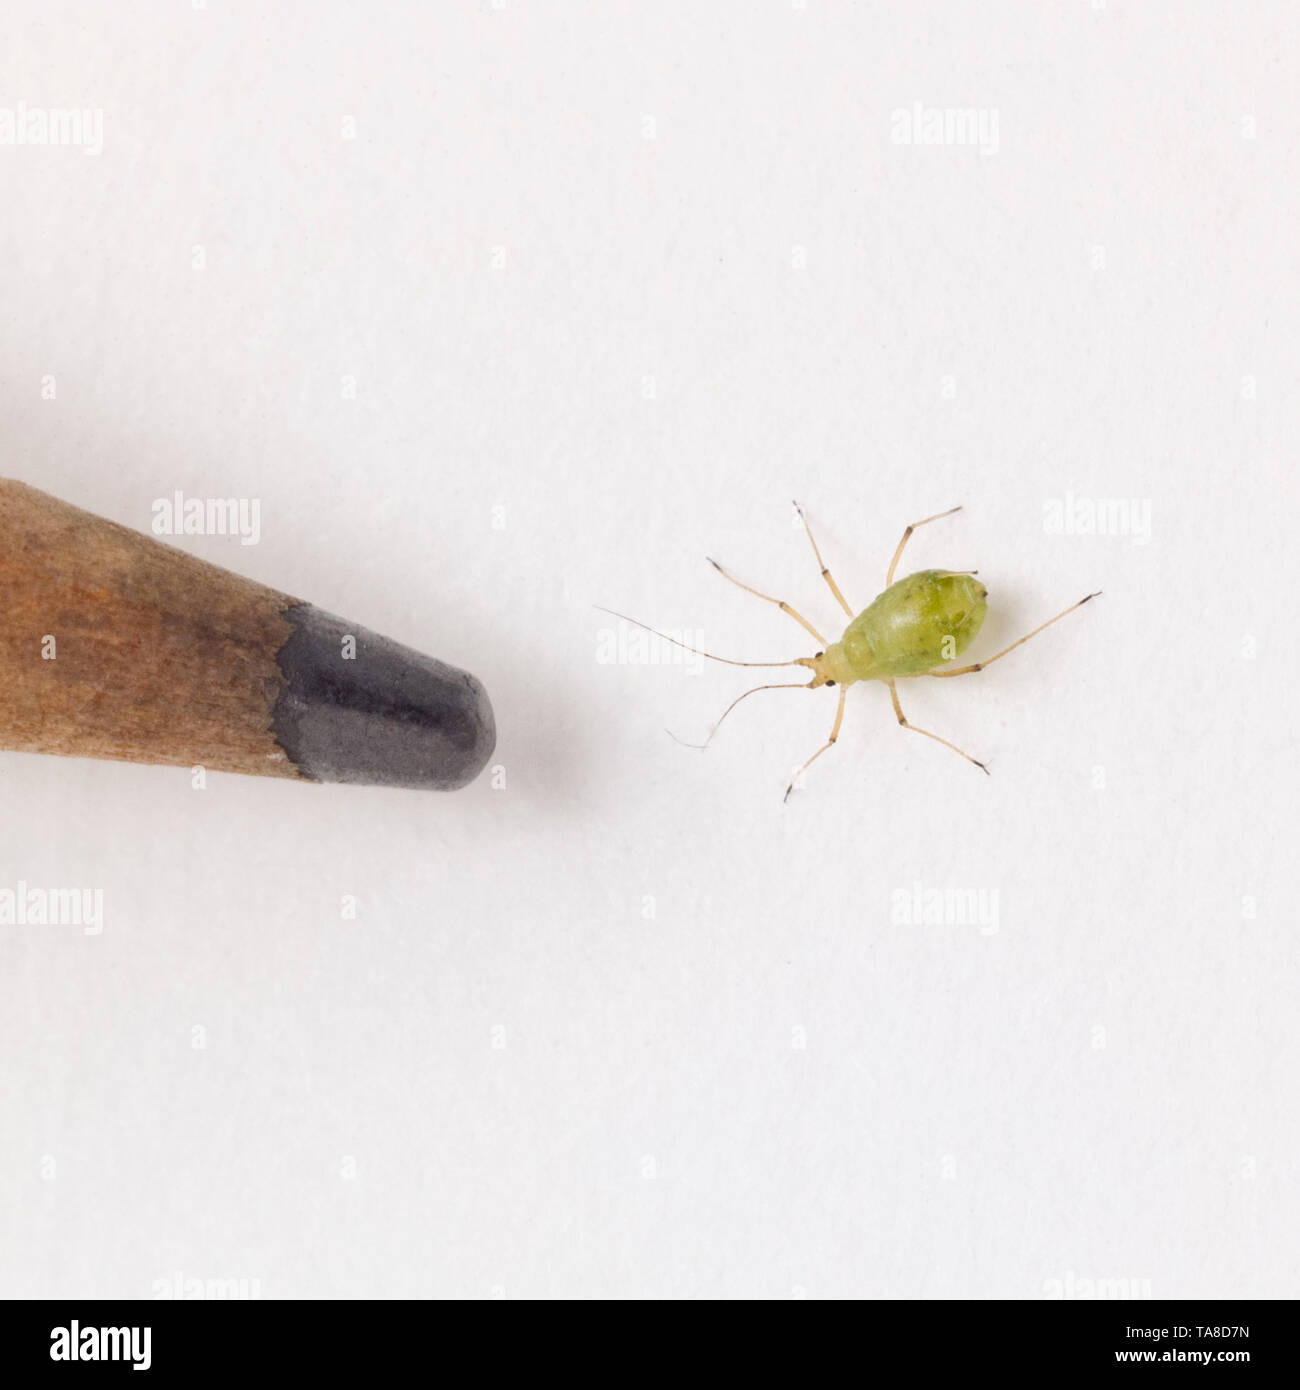 Aphid and Pencil Tip against White Background Stock Photo